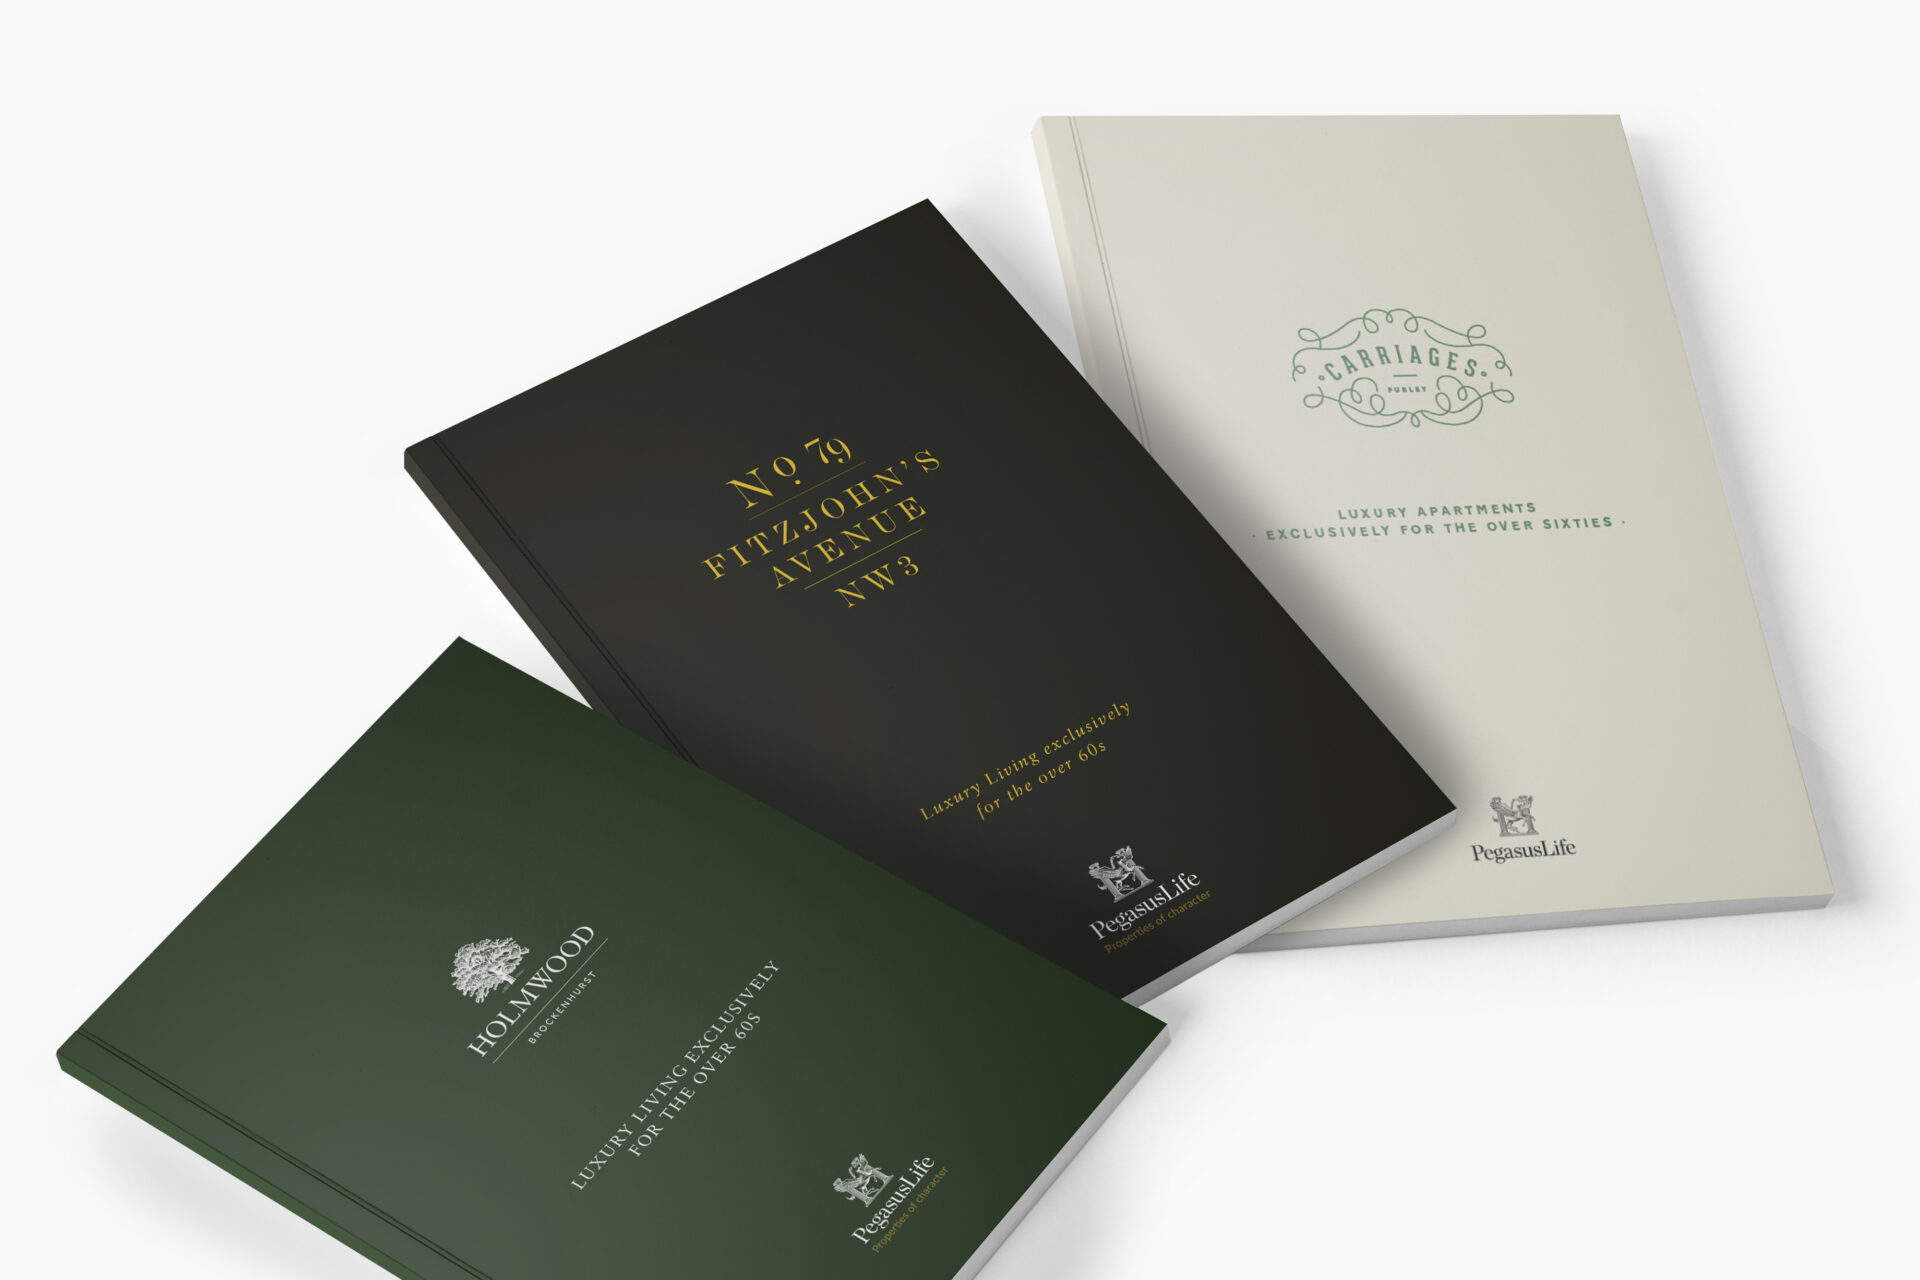 An image to show individually branded brochure front covers for three different developments.